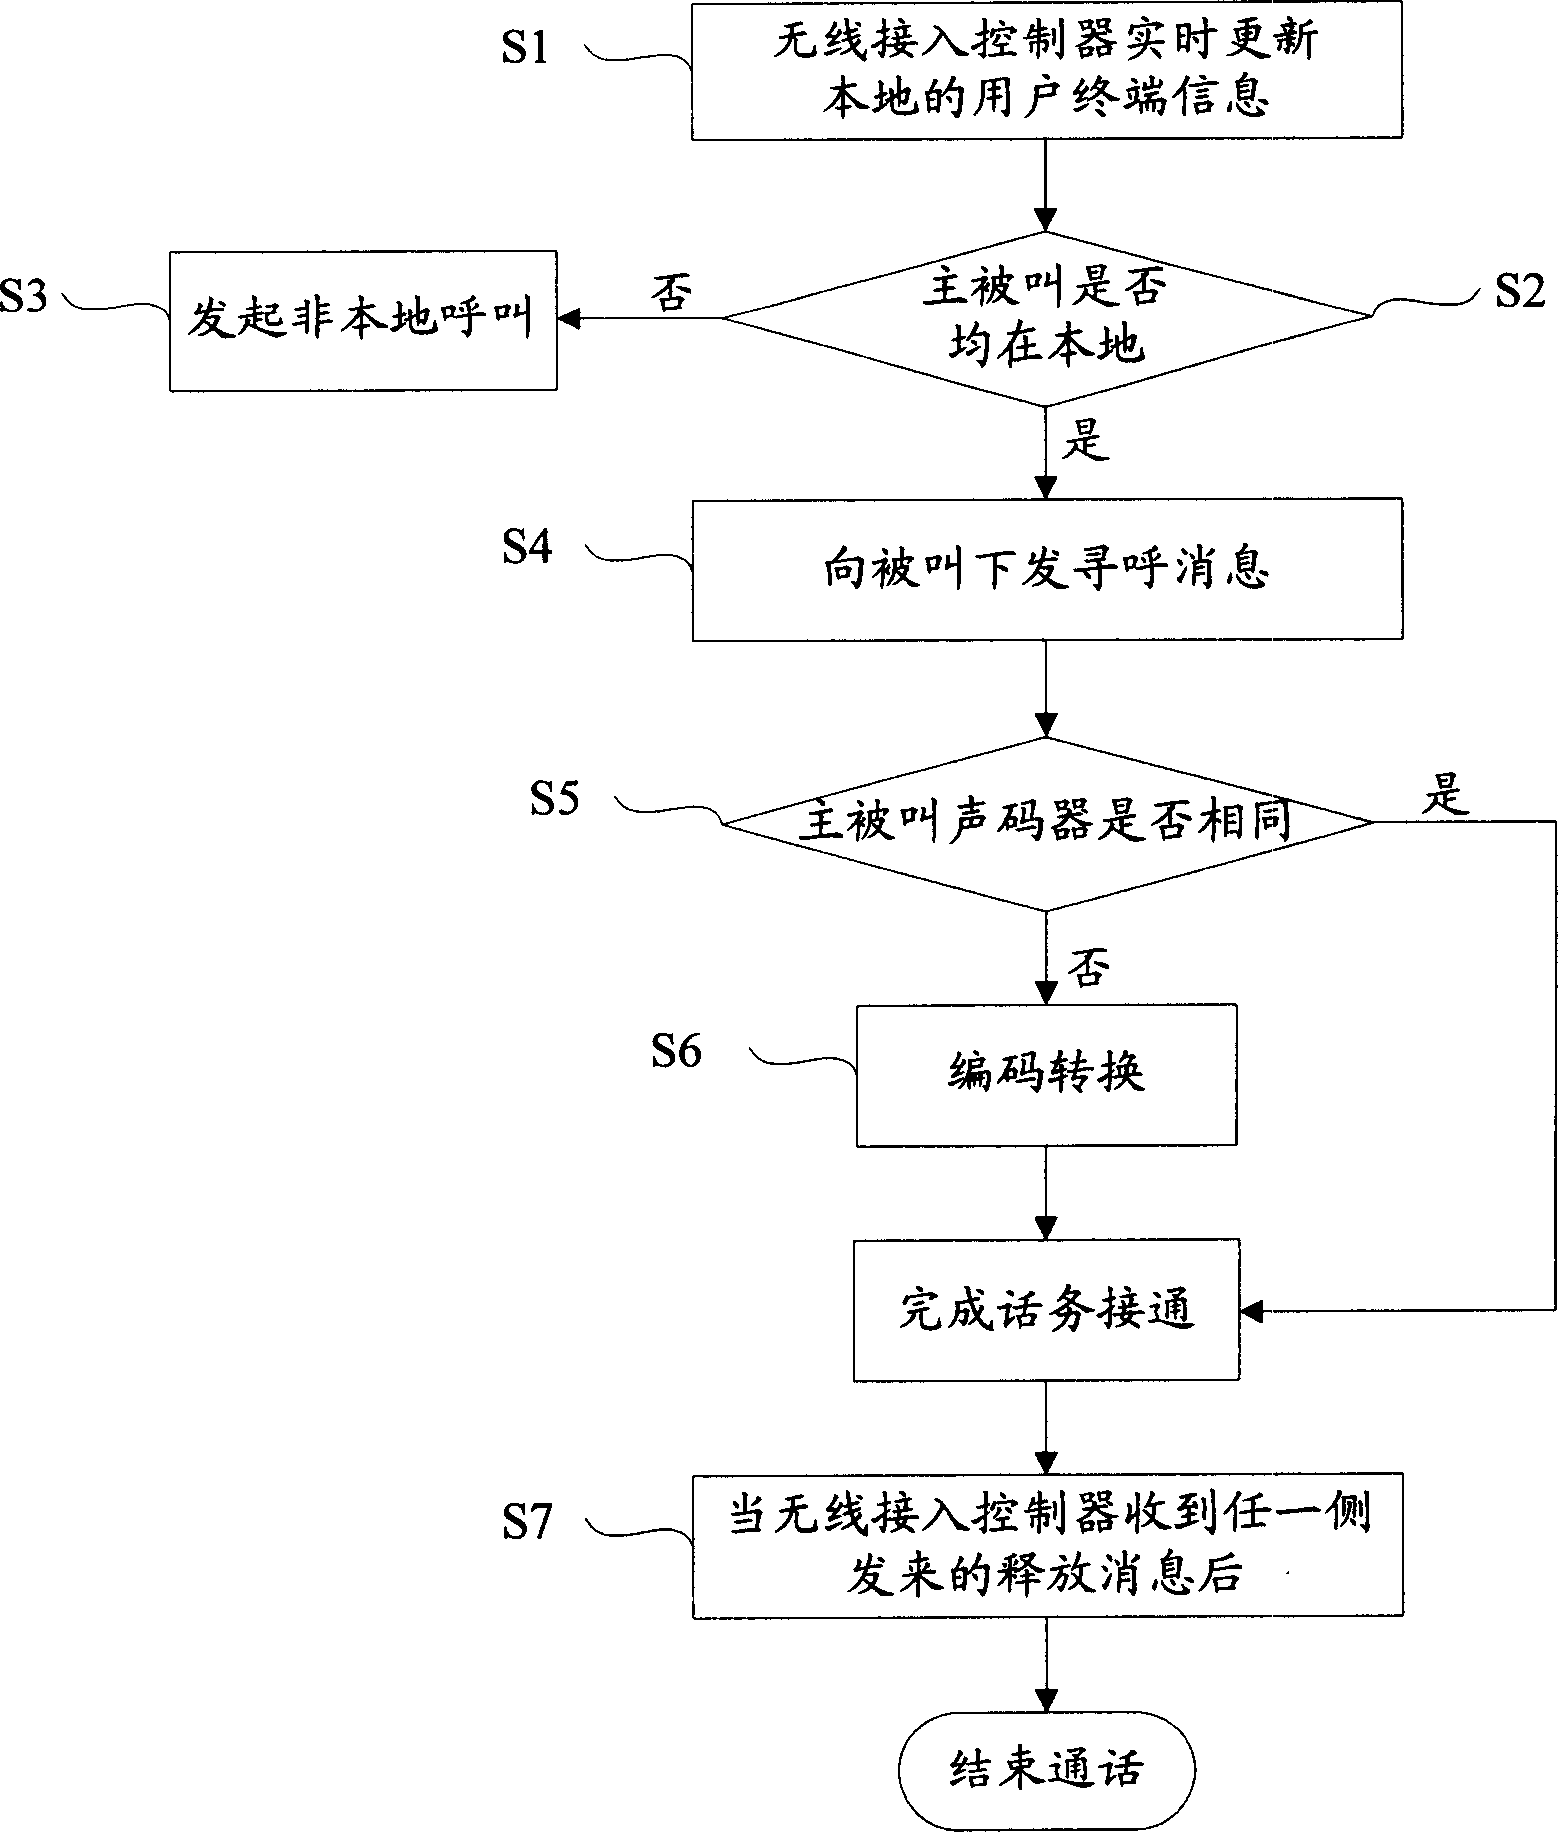 Method for realizing local exchange in wireless local loop system